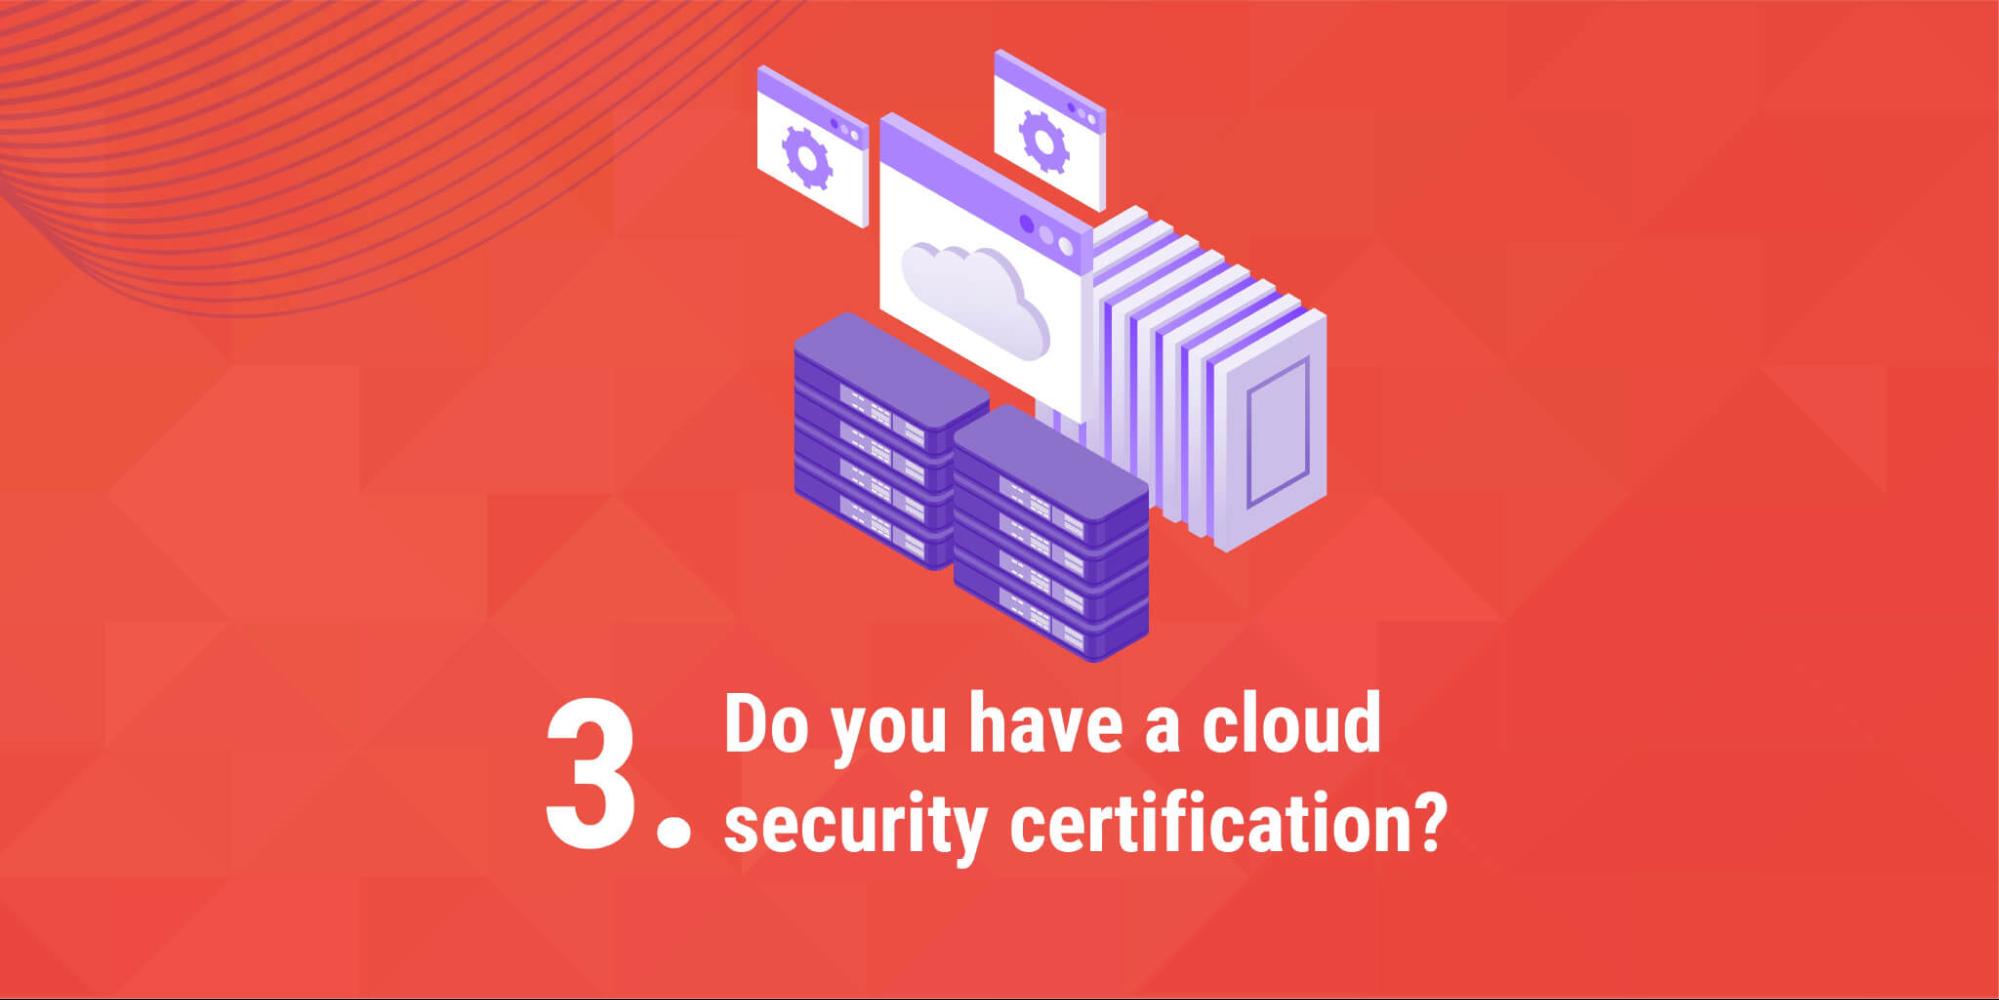 3. Do you have a cloud security certification?